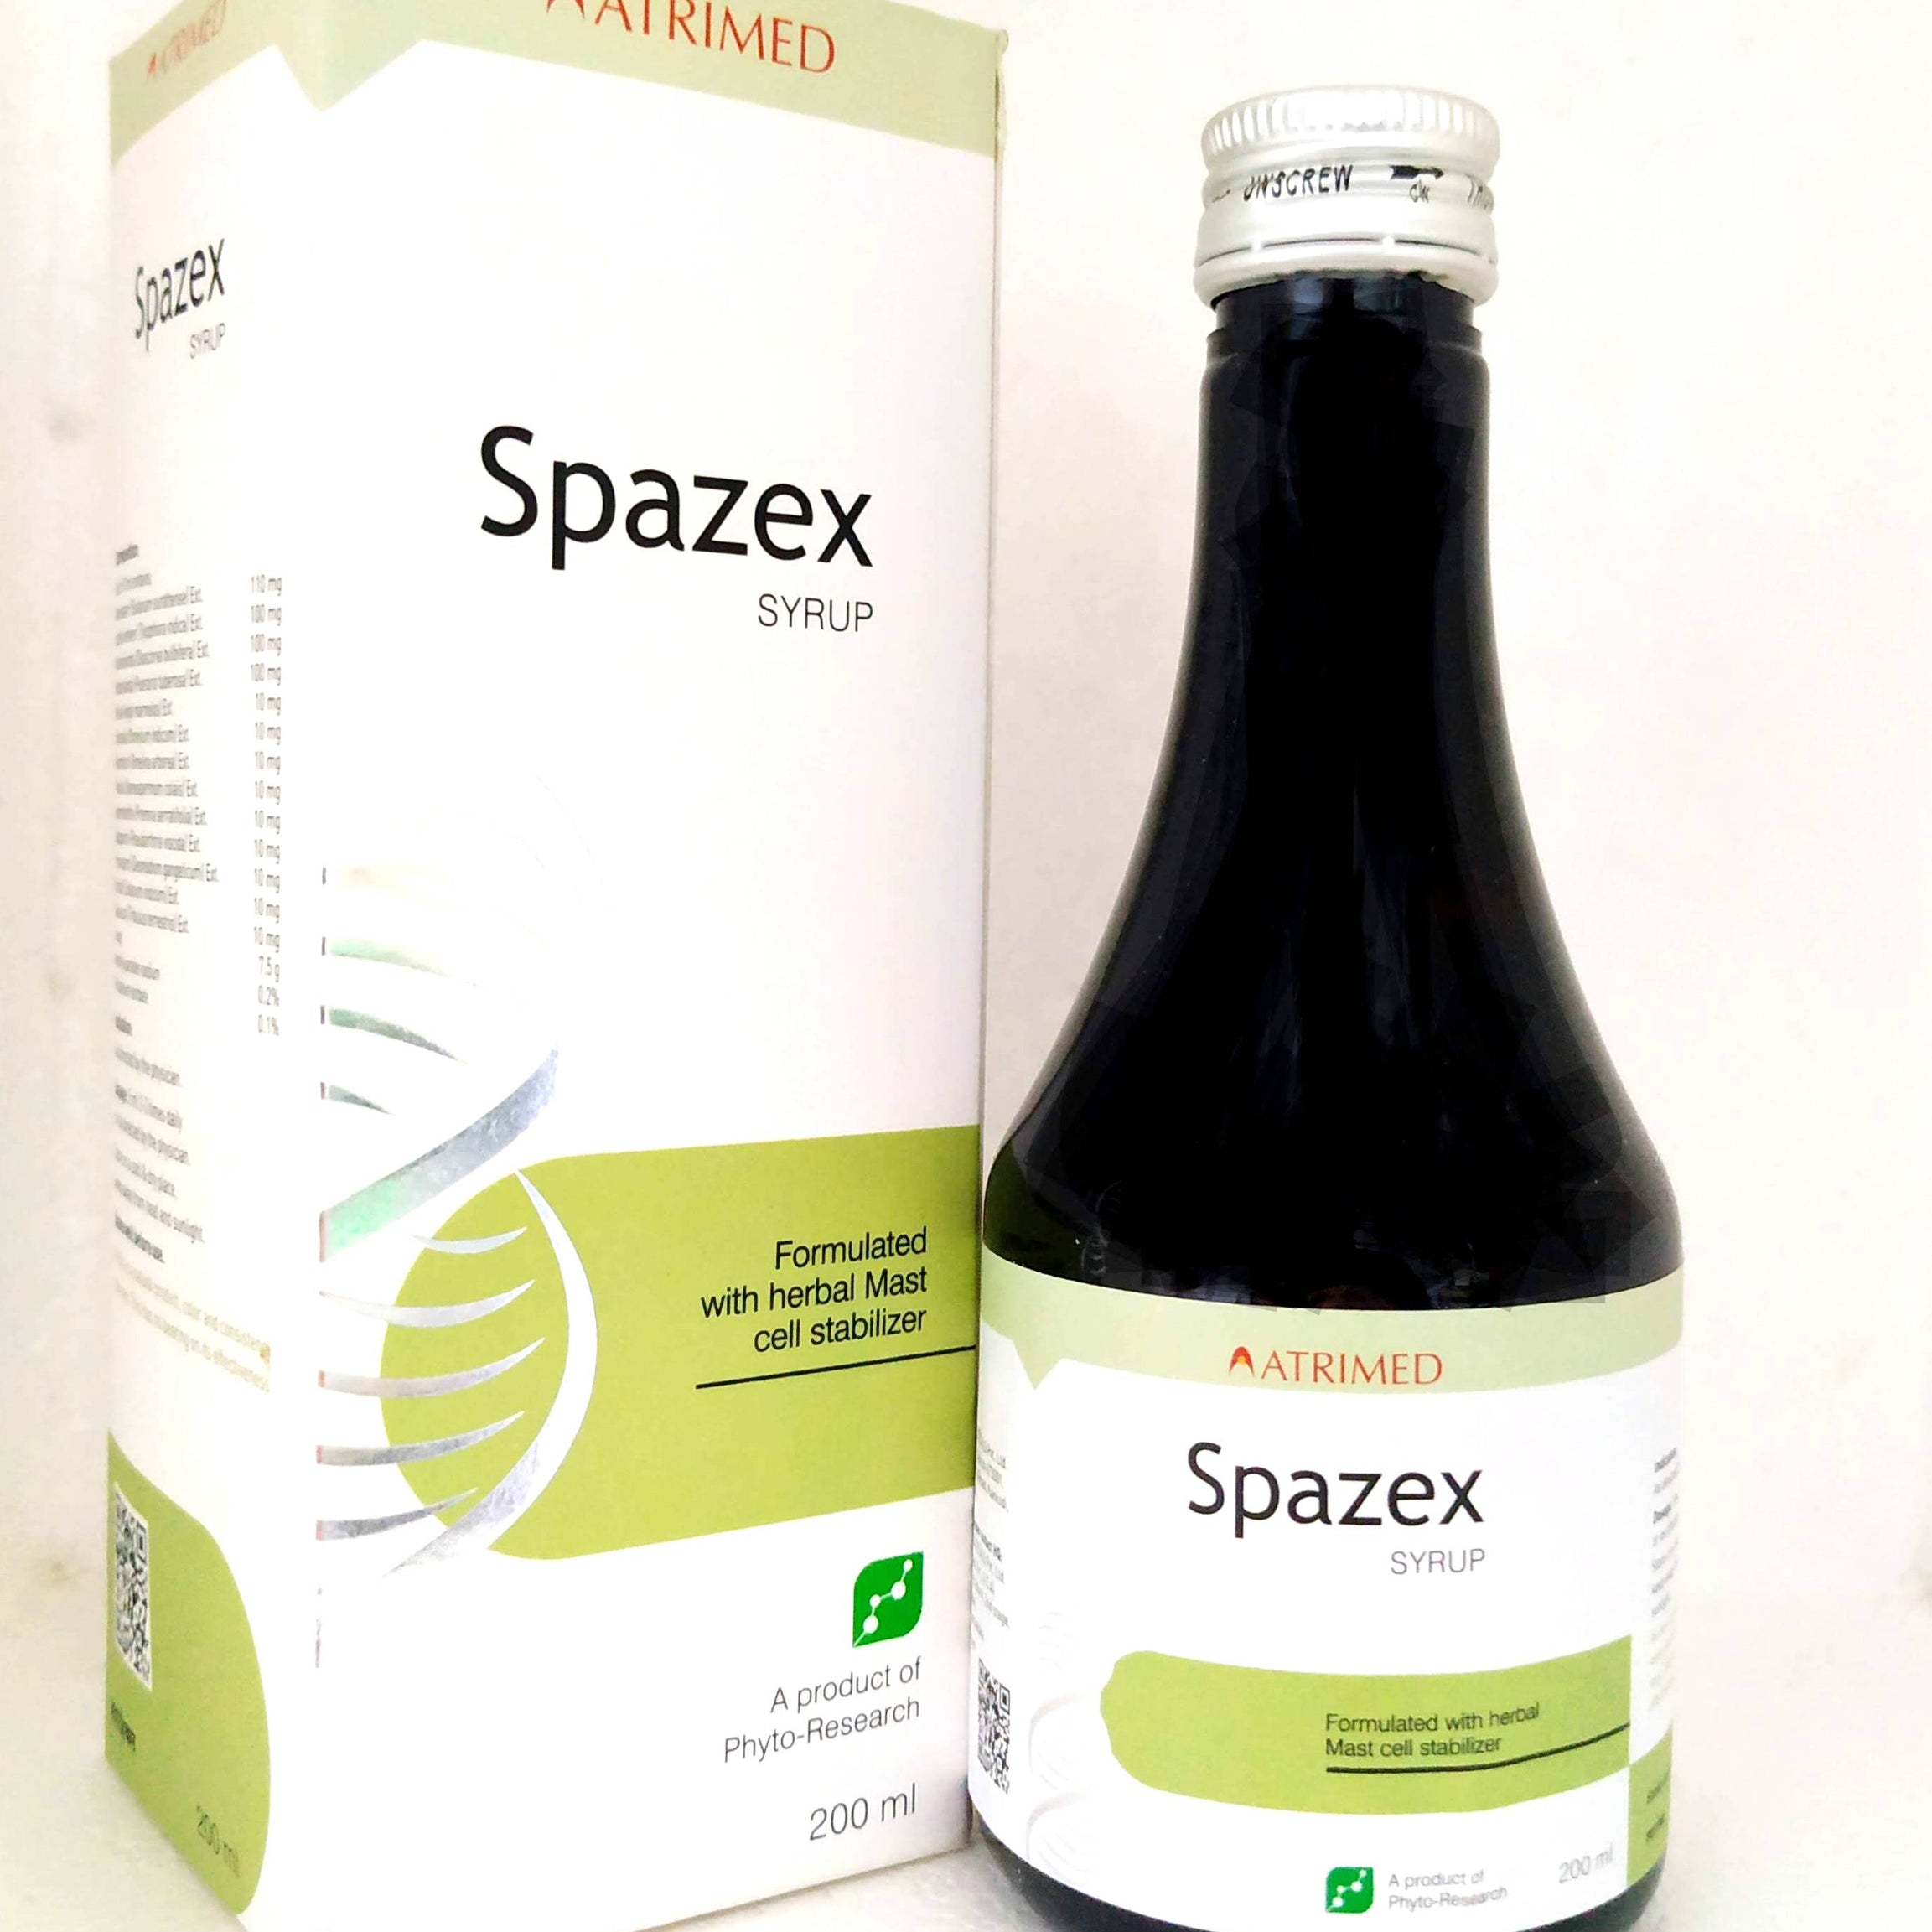 Shop Spazex Syrup 200ml at price 130.00 from Atrimed Online - Ayush Care